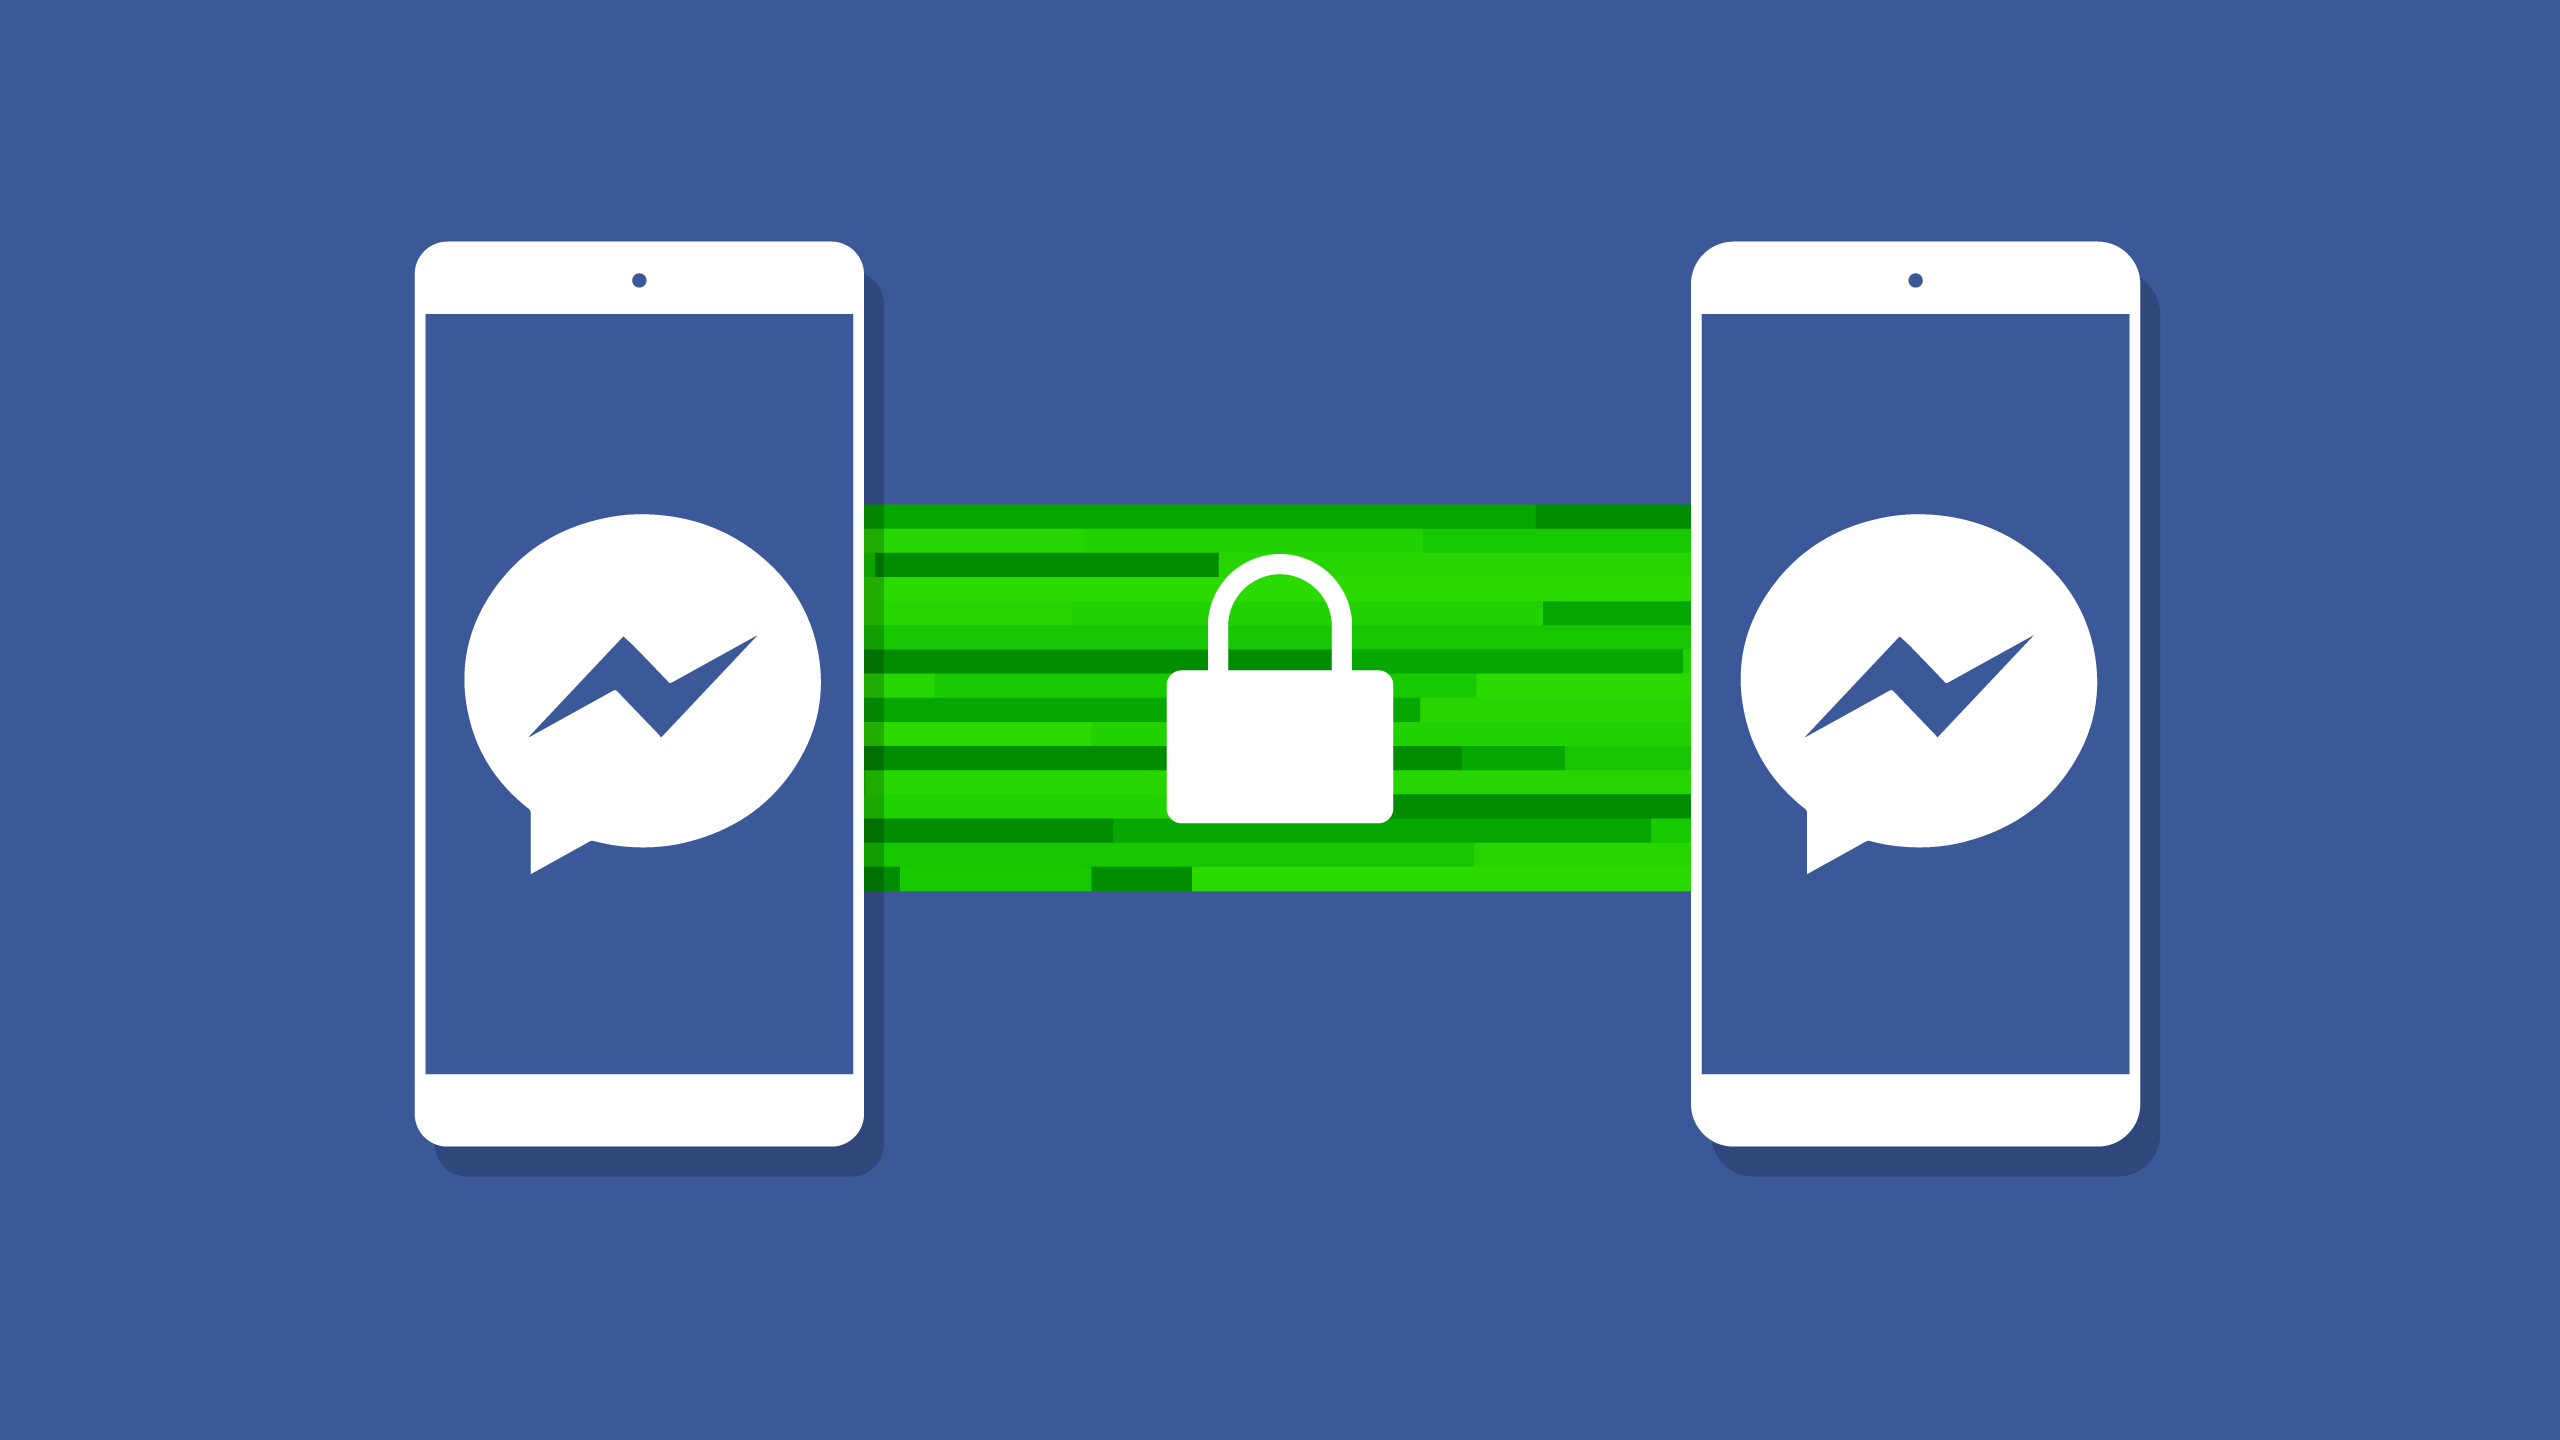 How To Use Facebook’s “Secret”: Message Encryption